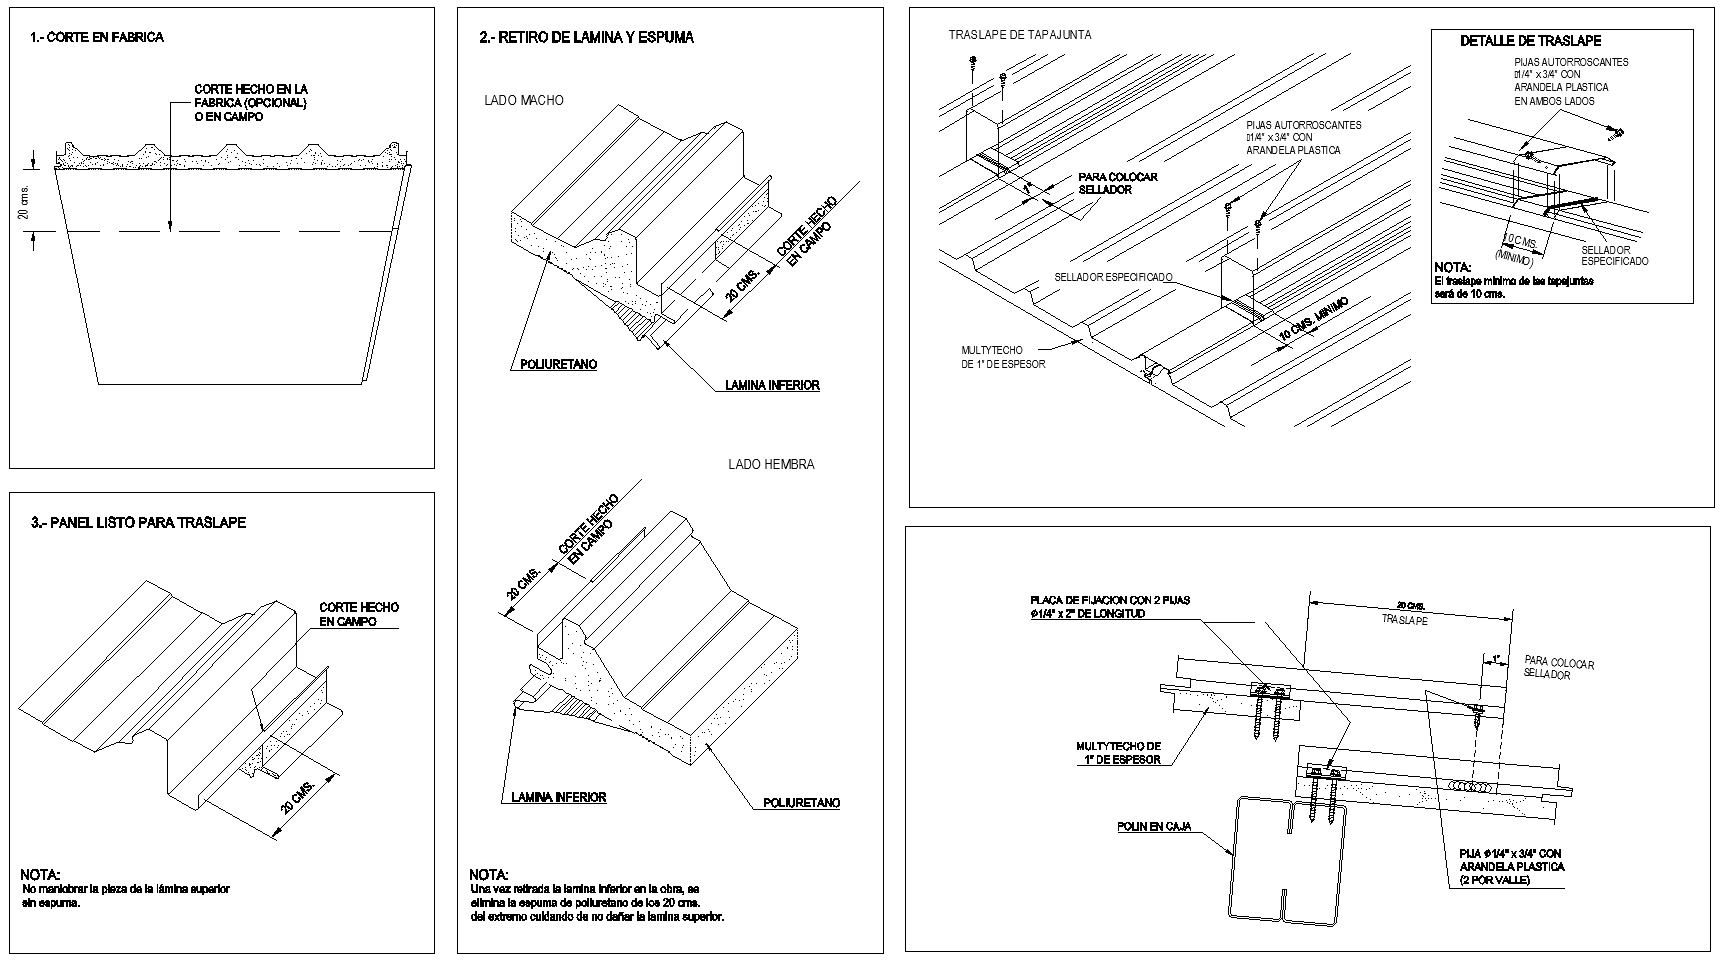 Roof Details】★ CAD Files, DWG files, Plans and Details